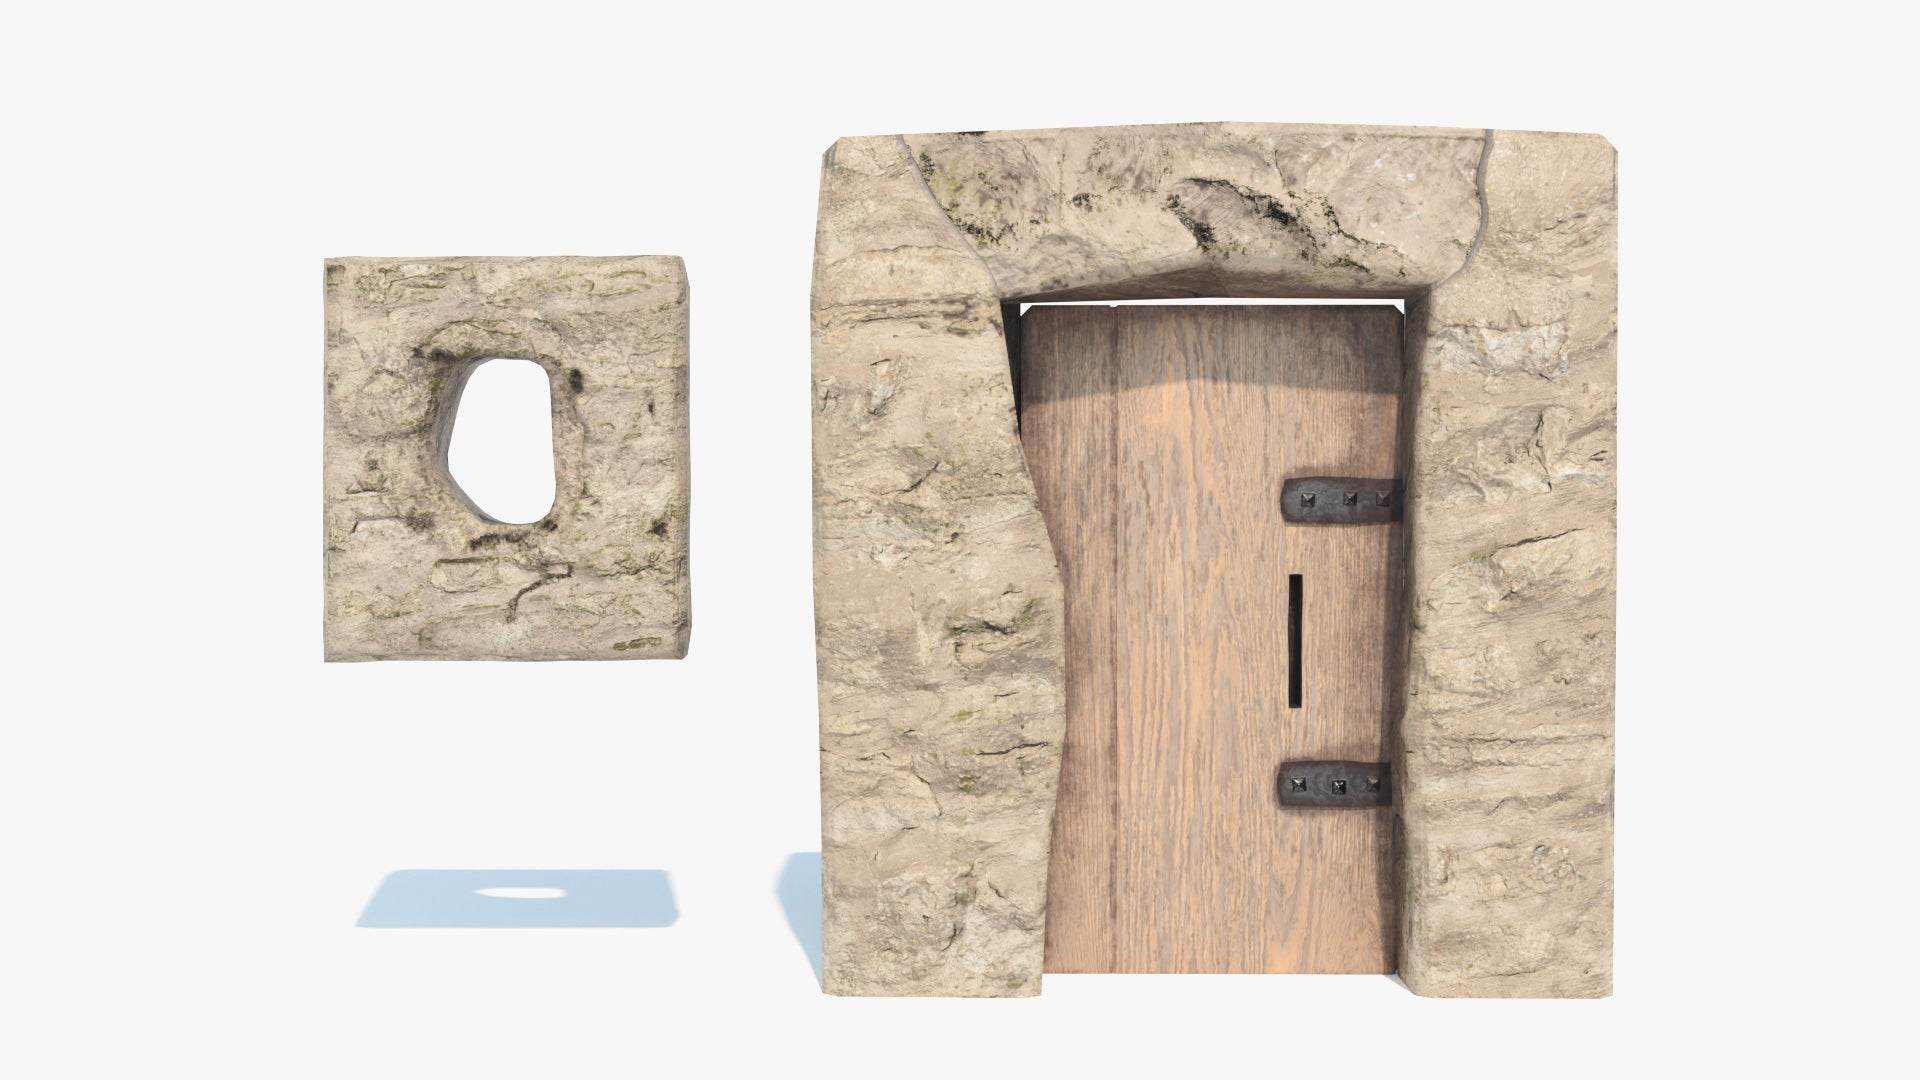 3d model of a secretive medieval rustic door and window, set on a stone wall, made with low polycount and PBR textures. Perfect game asset for the metaverse